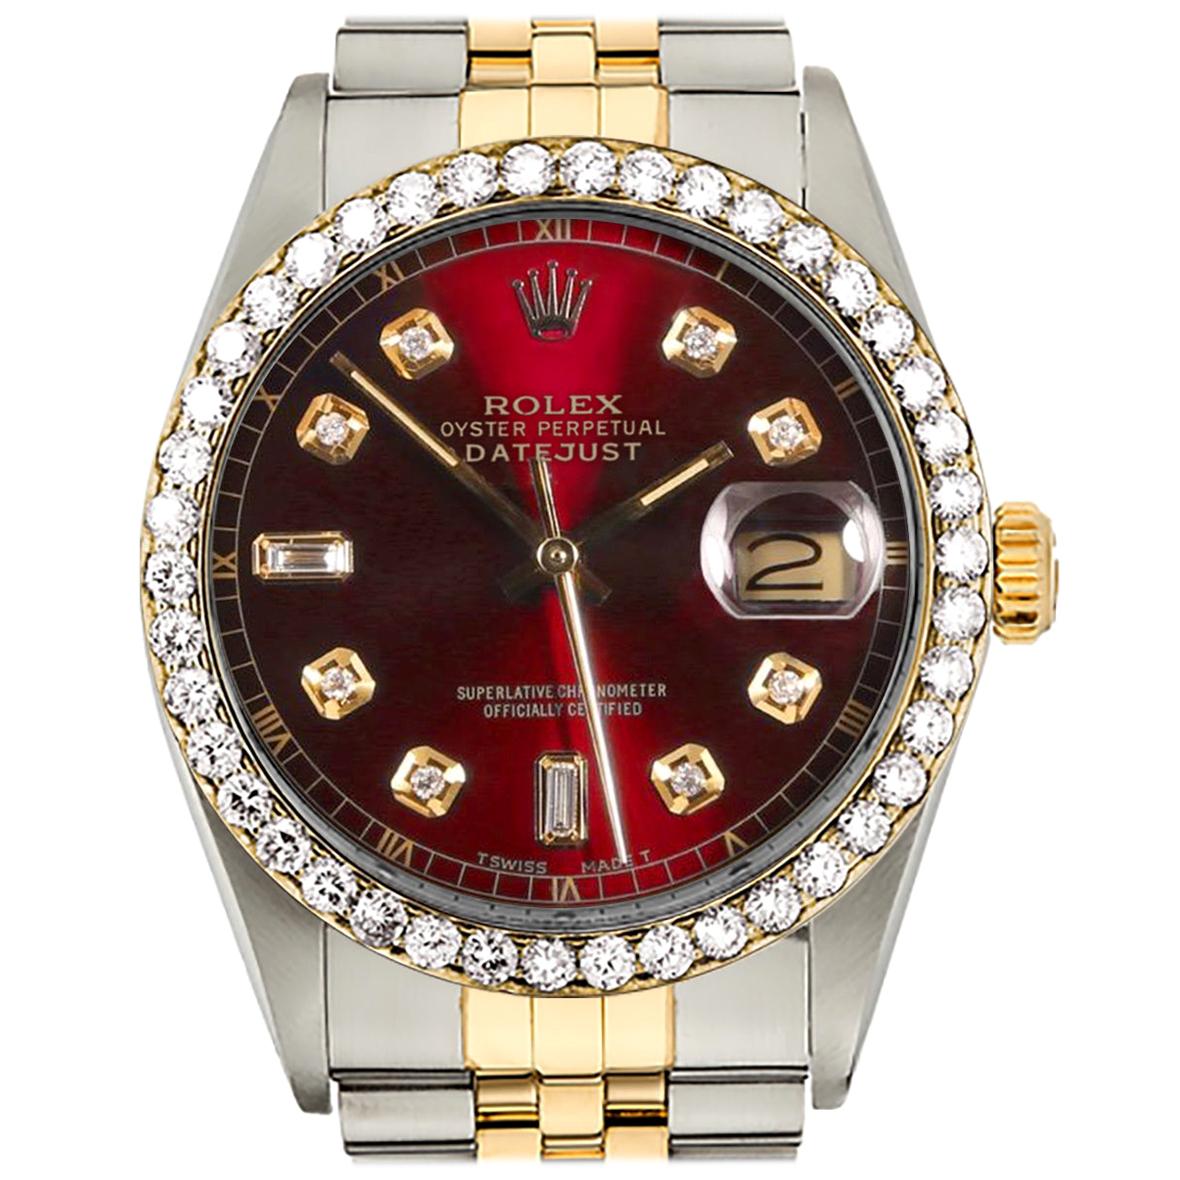 Certified 2.00 Carat Diamond Rolex Two-Tone 18K Gold Datejust Red Baguette Dial